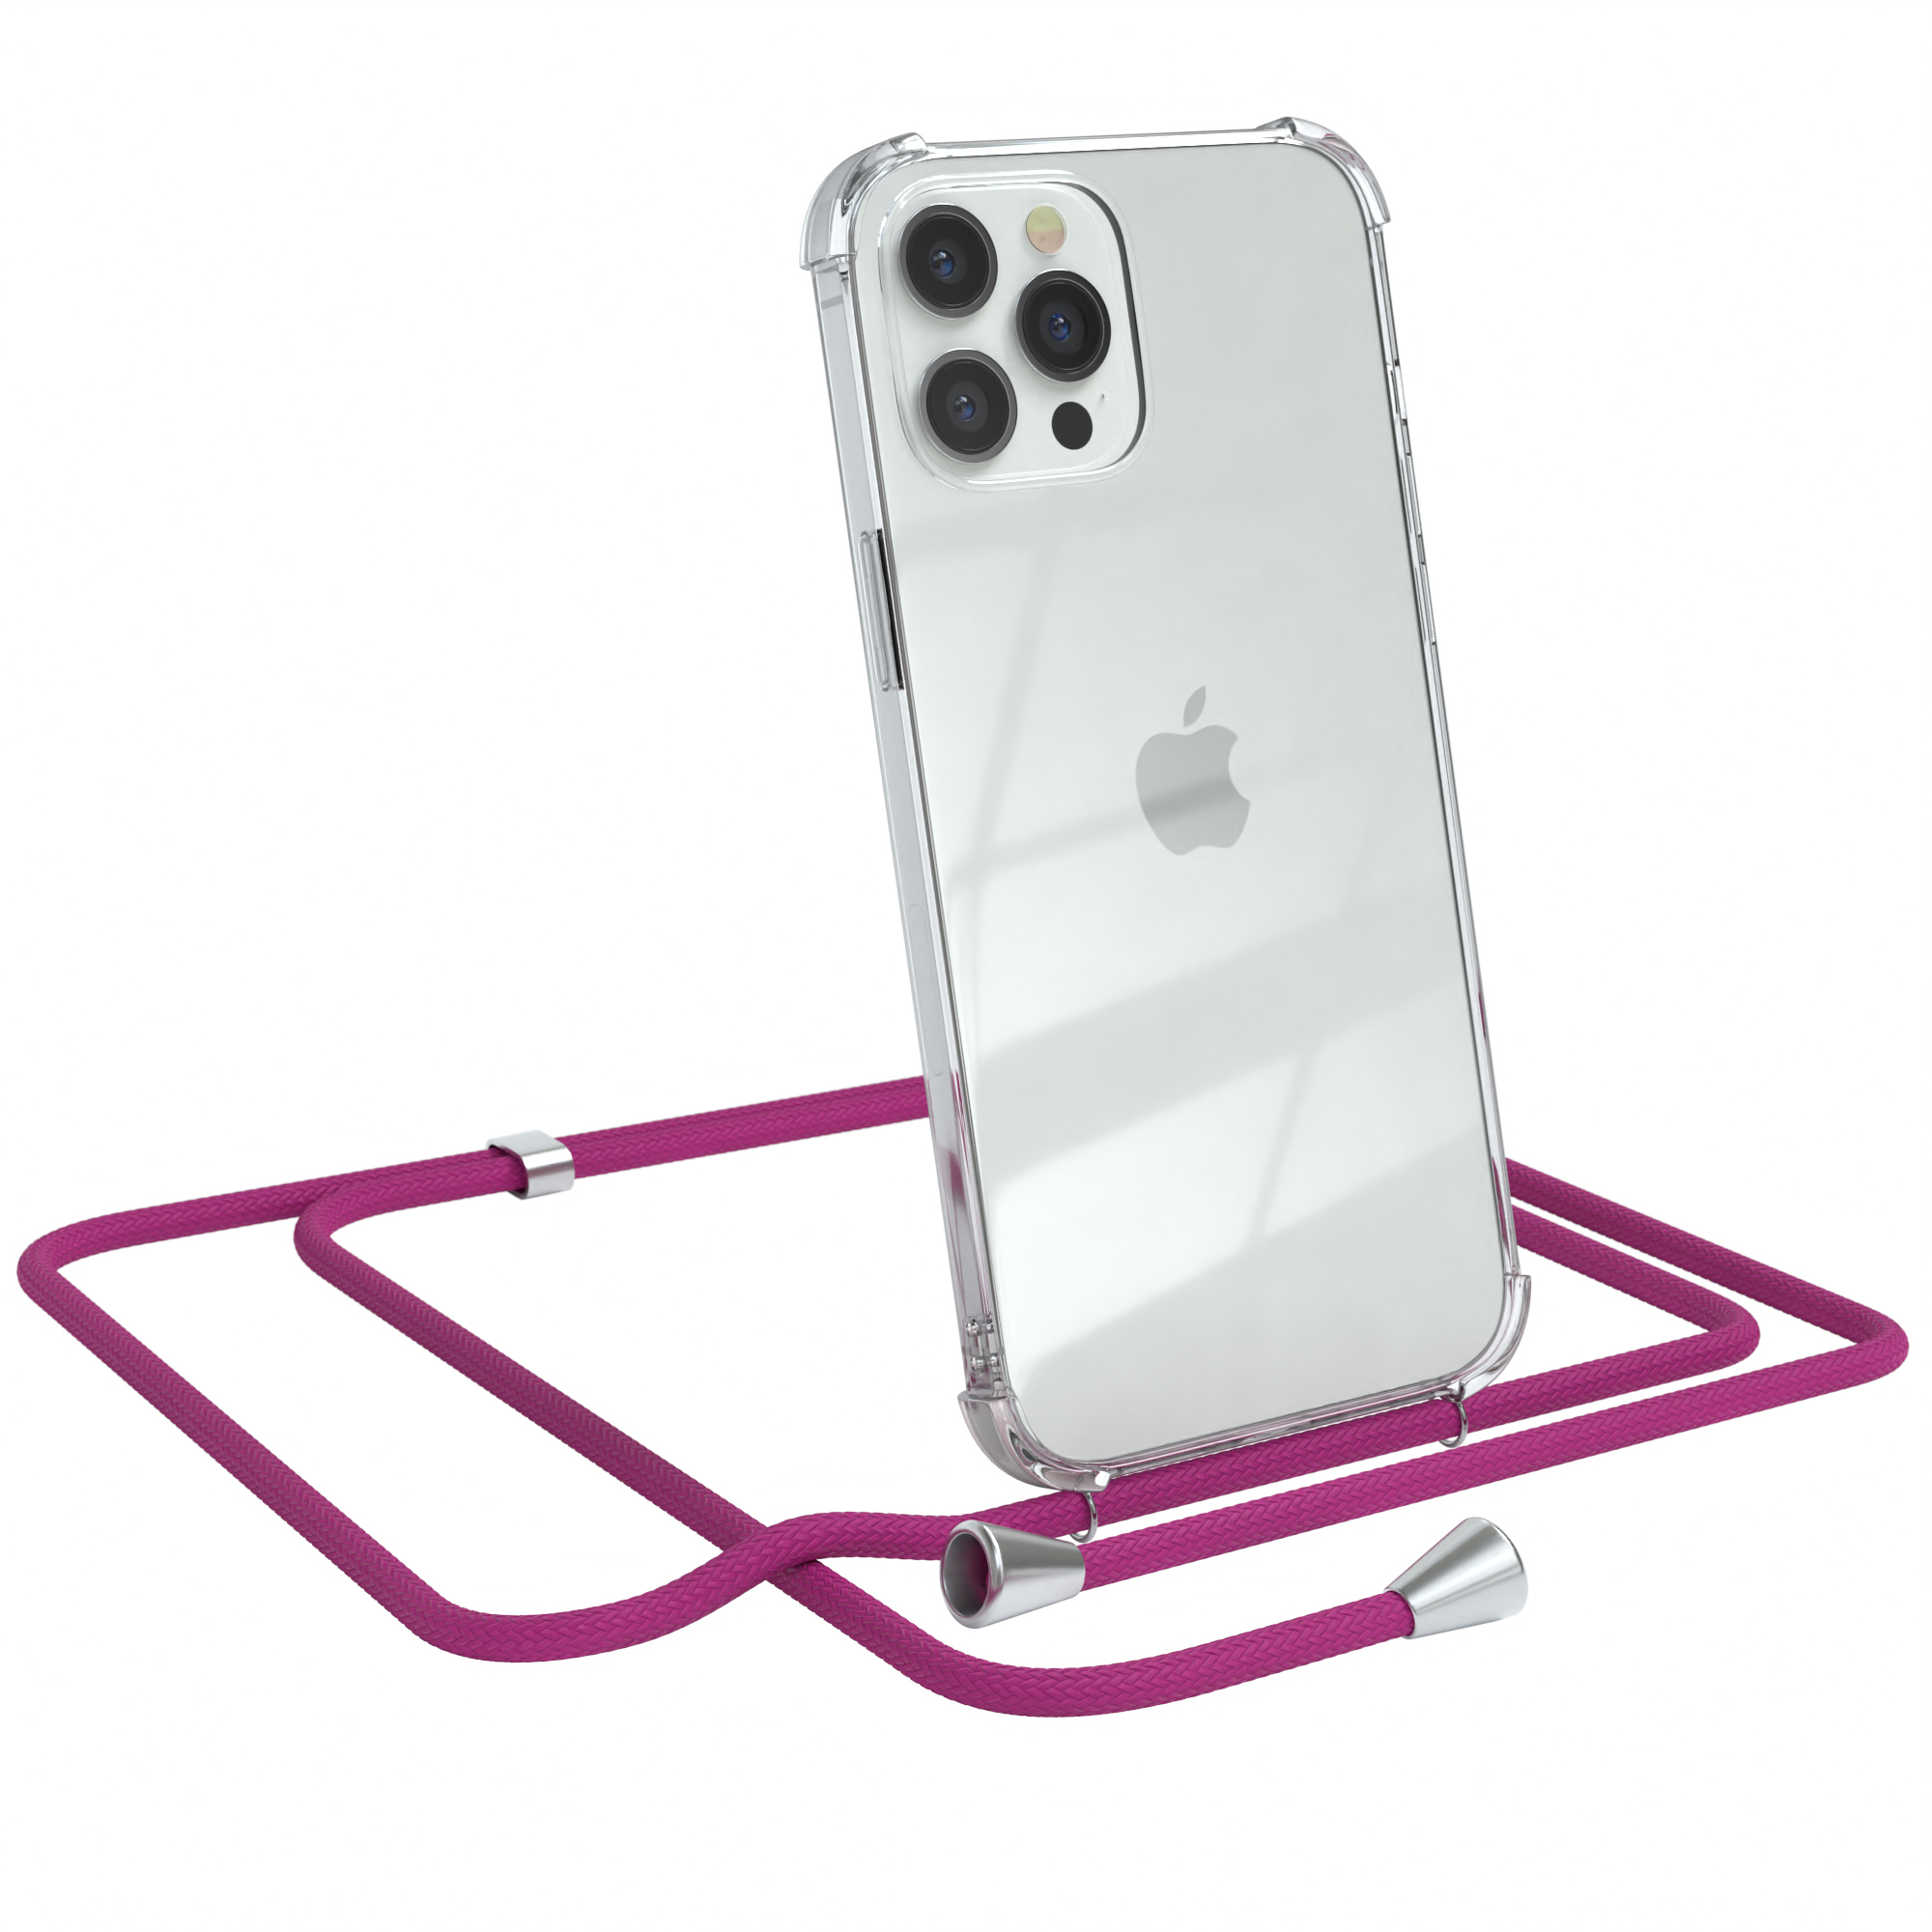 / EAZY Clips Silber iPhone Umhängeband, Umhängetasche, Apple, Pro Pink Max, Clear Cover mit 12 CASE